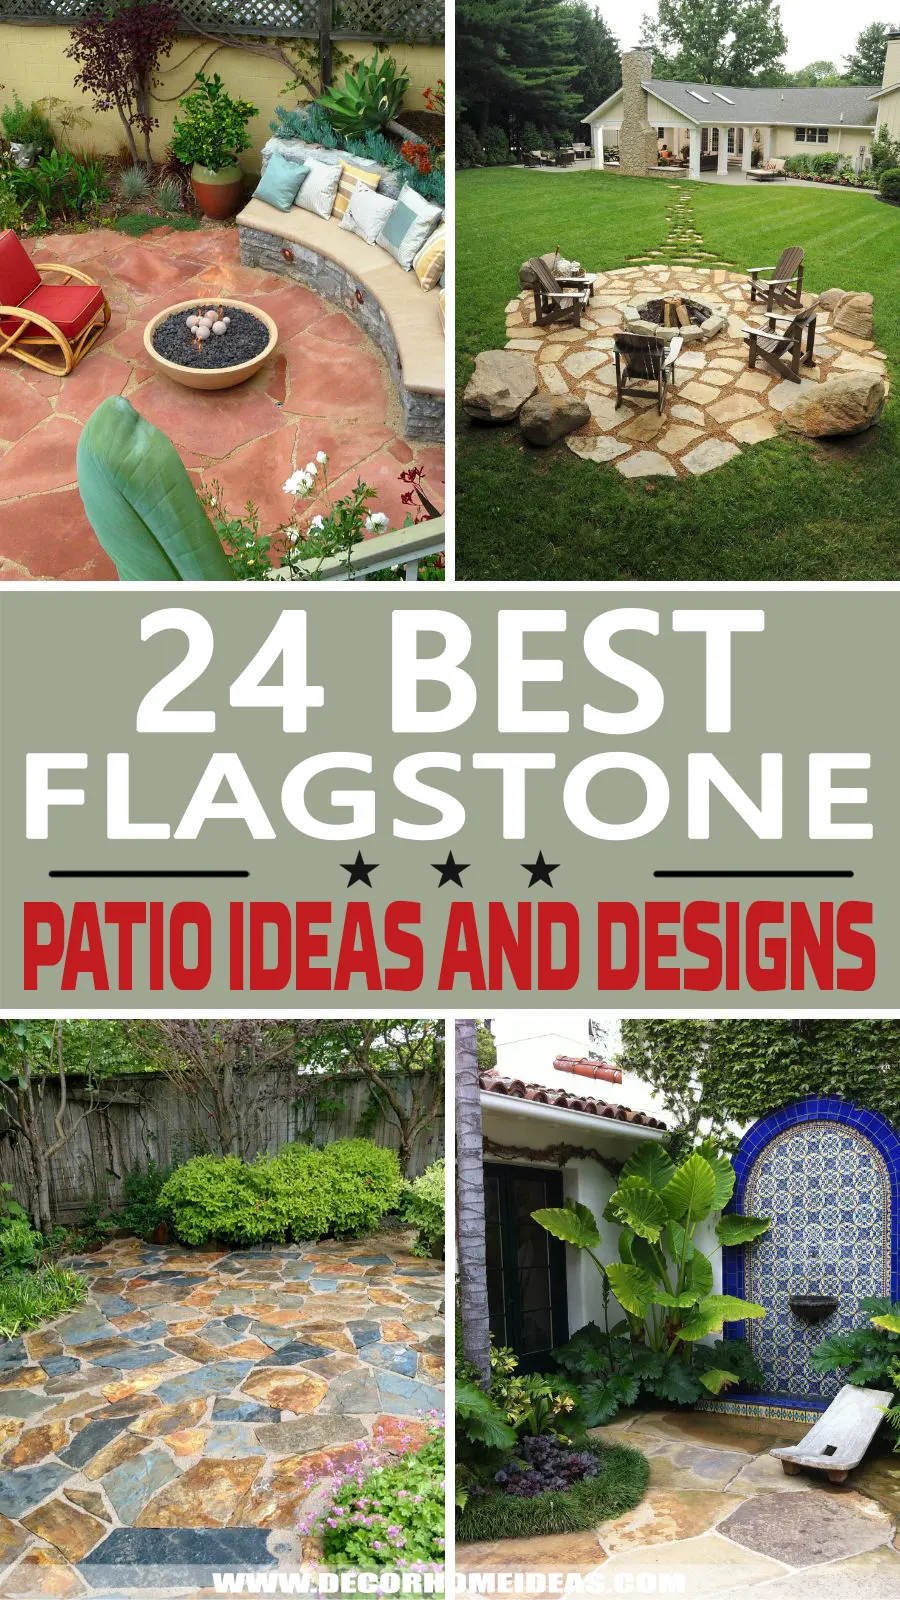 As flagstone is one of the most preferred materials to use in a patio we have selected the best flagstone patio ideas and designs to choose from for your next makeover.